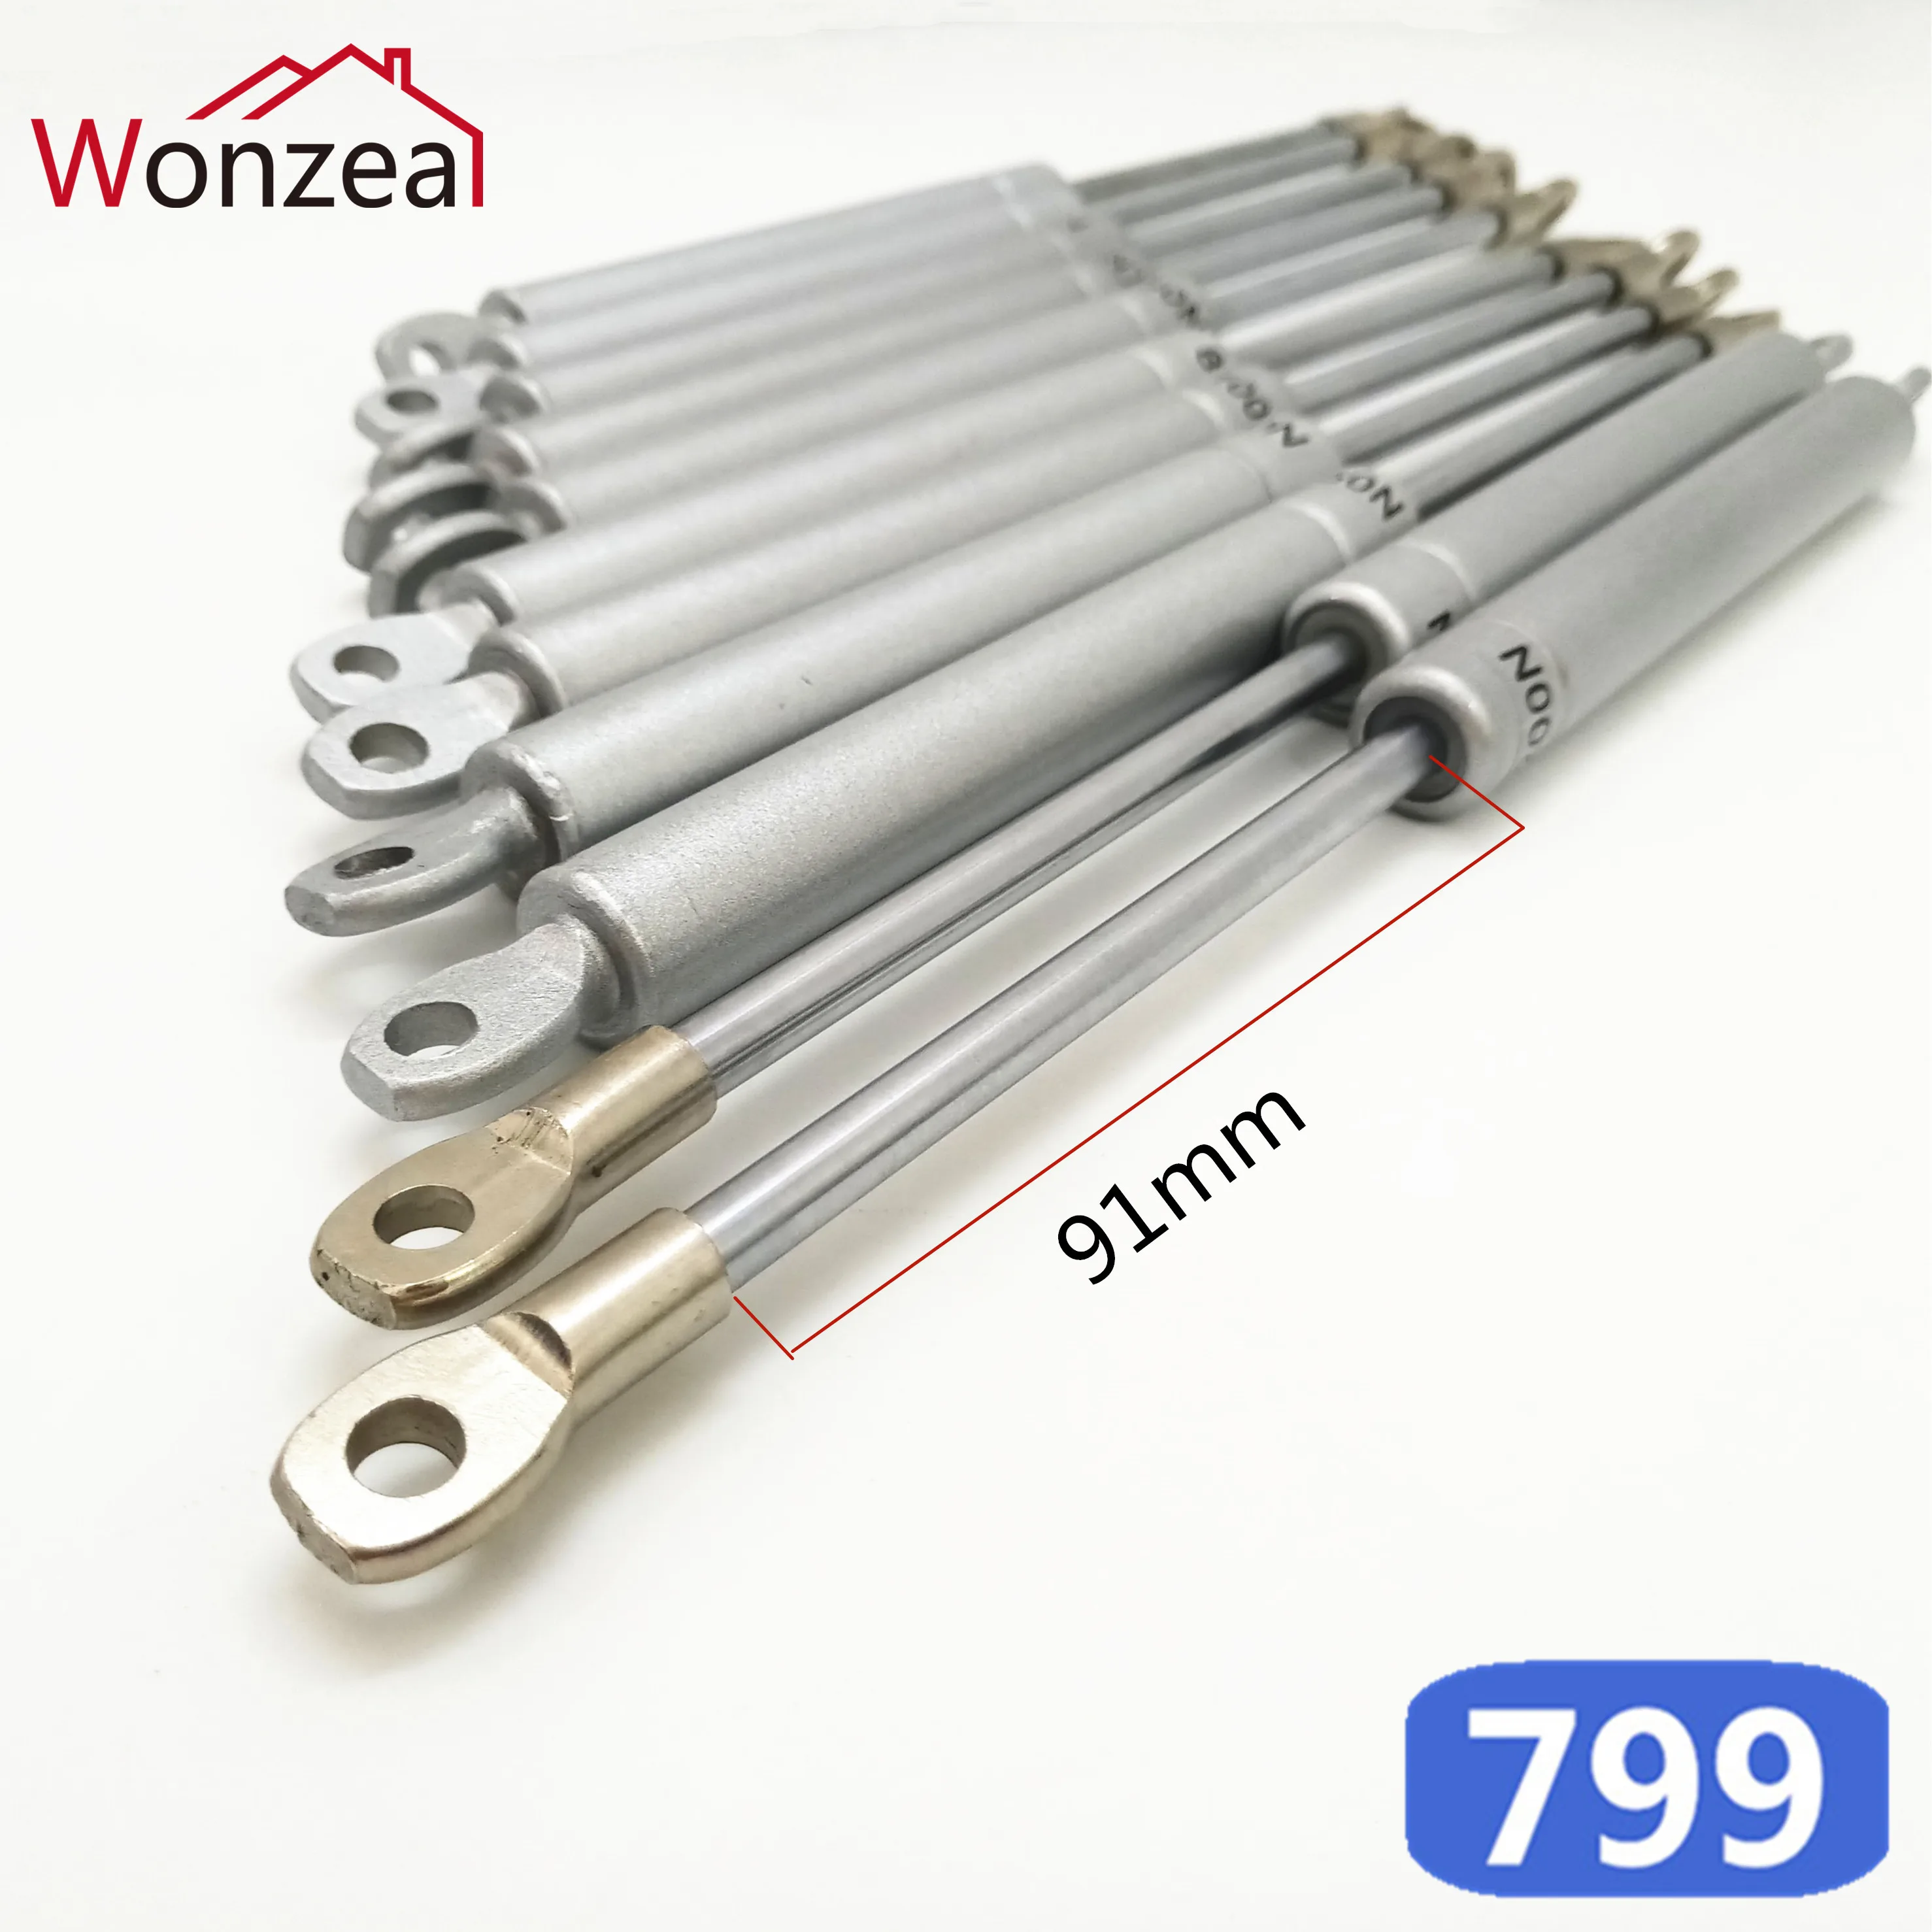 260mm Hydraulic Lift Up Pneumatic Door Support Furniture Gas Spring Kitchen Cabinet Hardware Hinge Cabinet Hinges Aliexpress